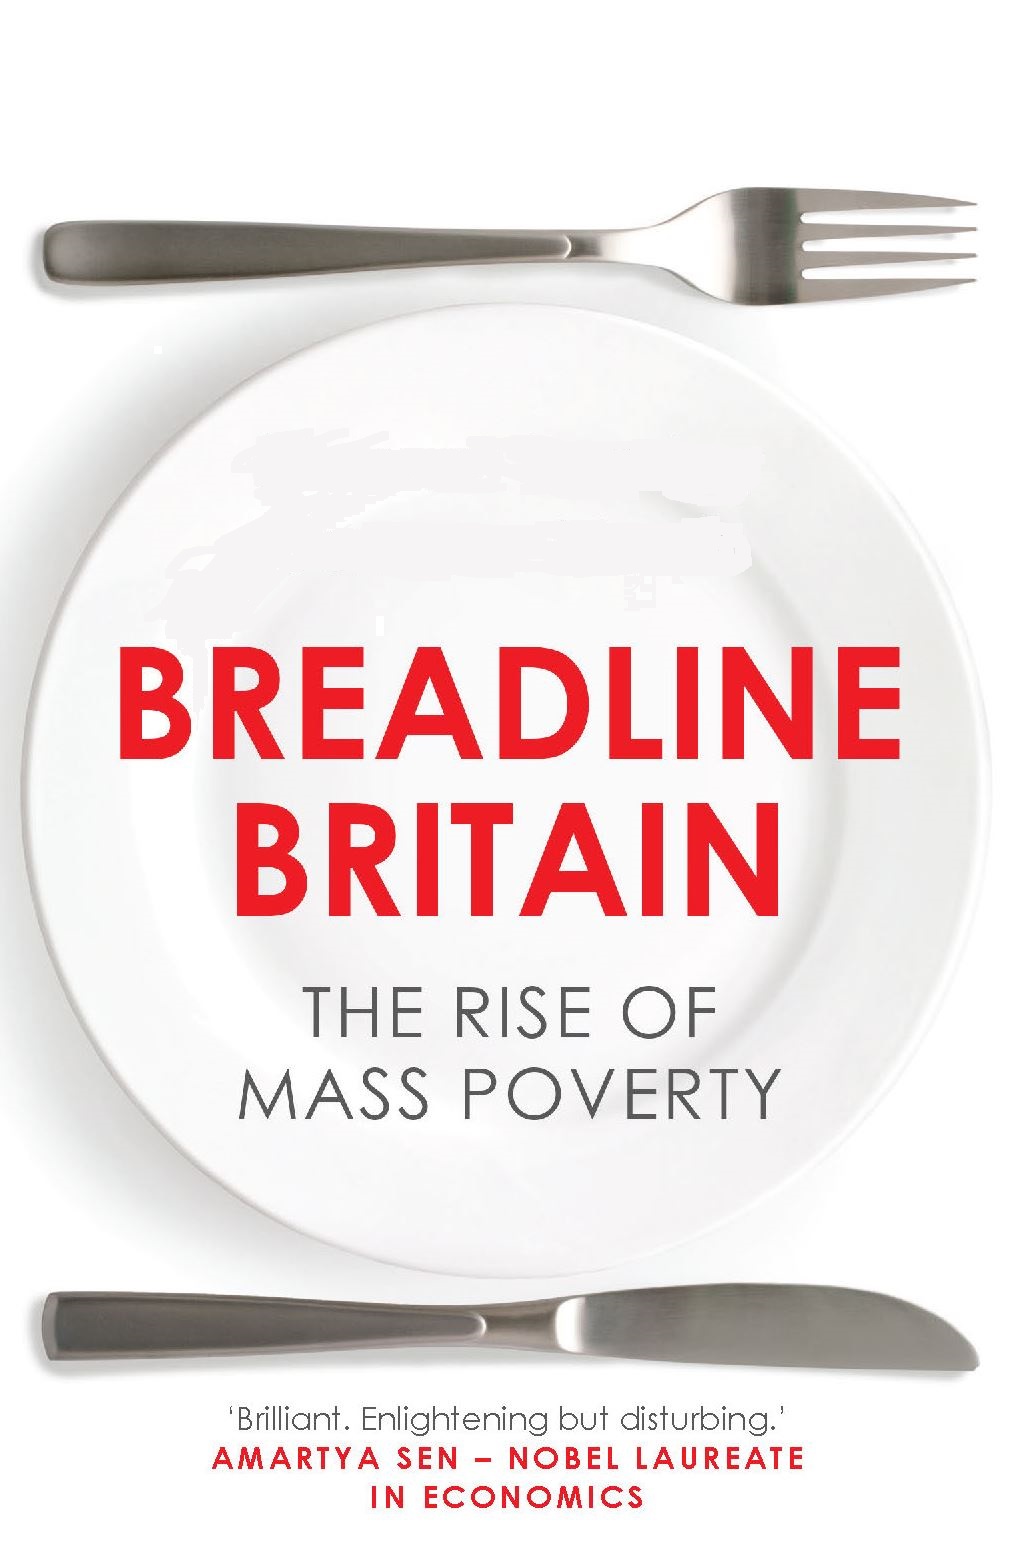 Breadline Britain book cover - names blocked out